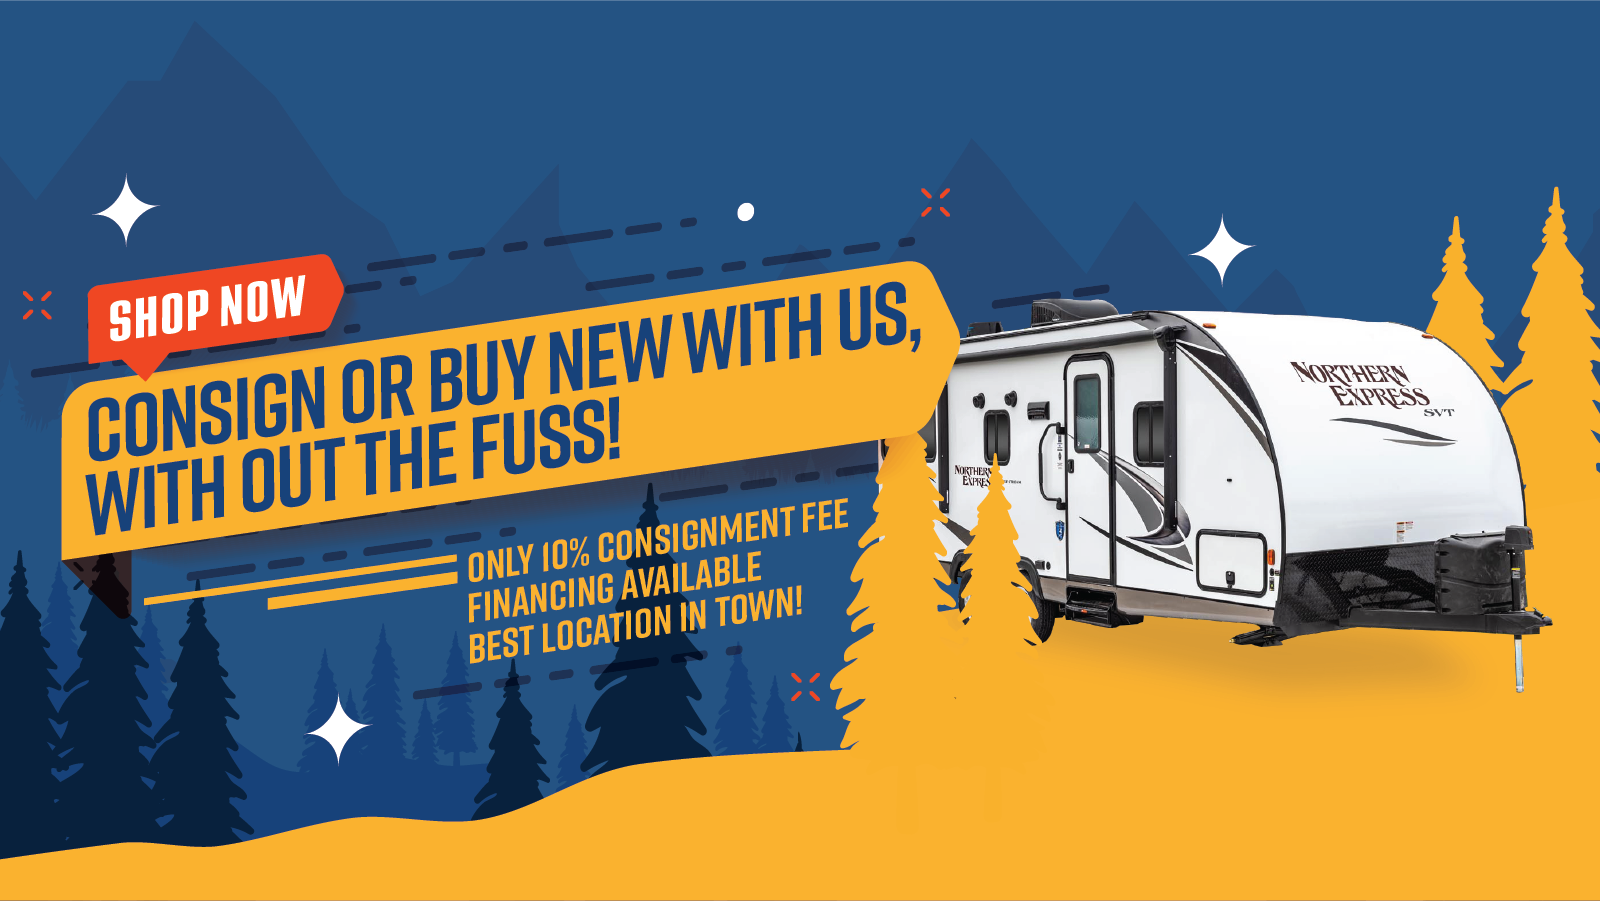 Oceanside RV Sales graphic Consign or buy new with us, without the fuss only 10% consignment fee financing available best location in town RV in photo and yellow and blue forest in the background